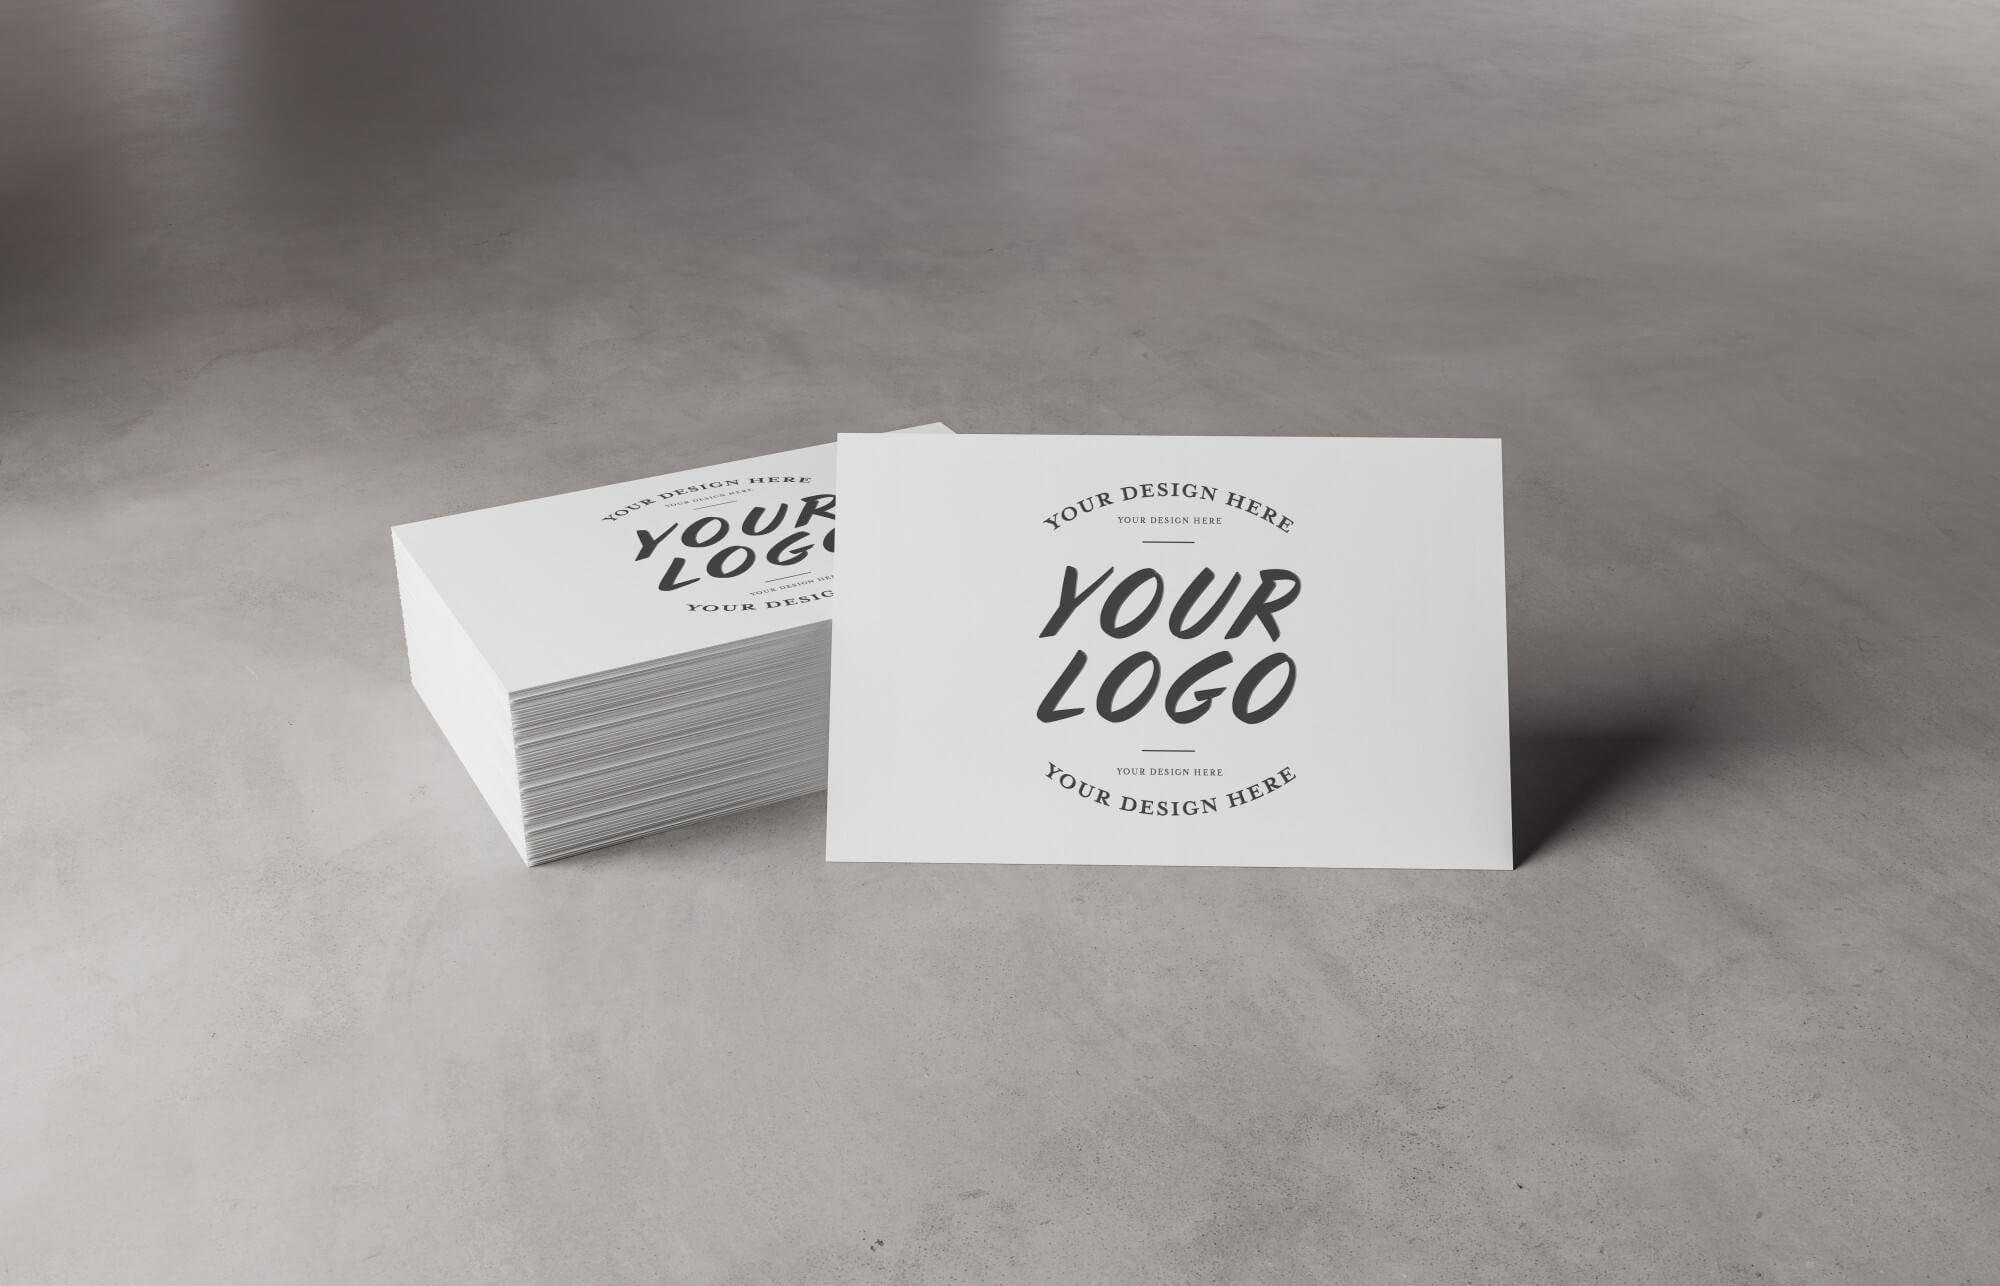 What Is a Business Card Good for in 2019